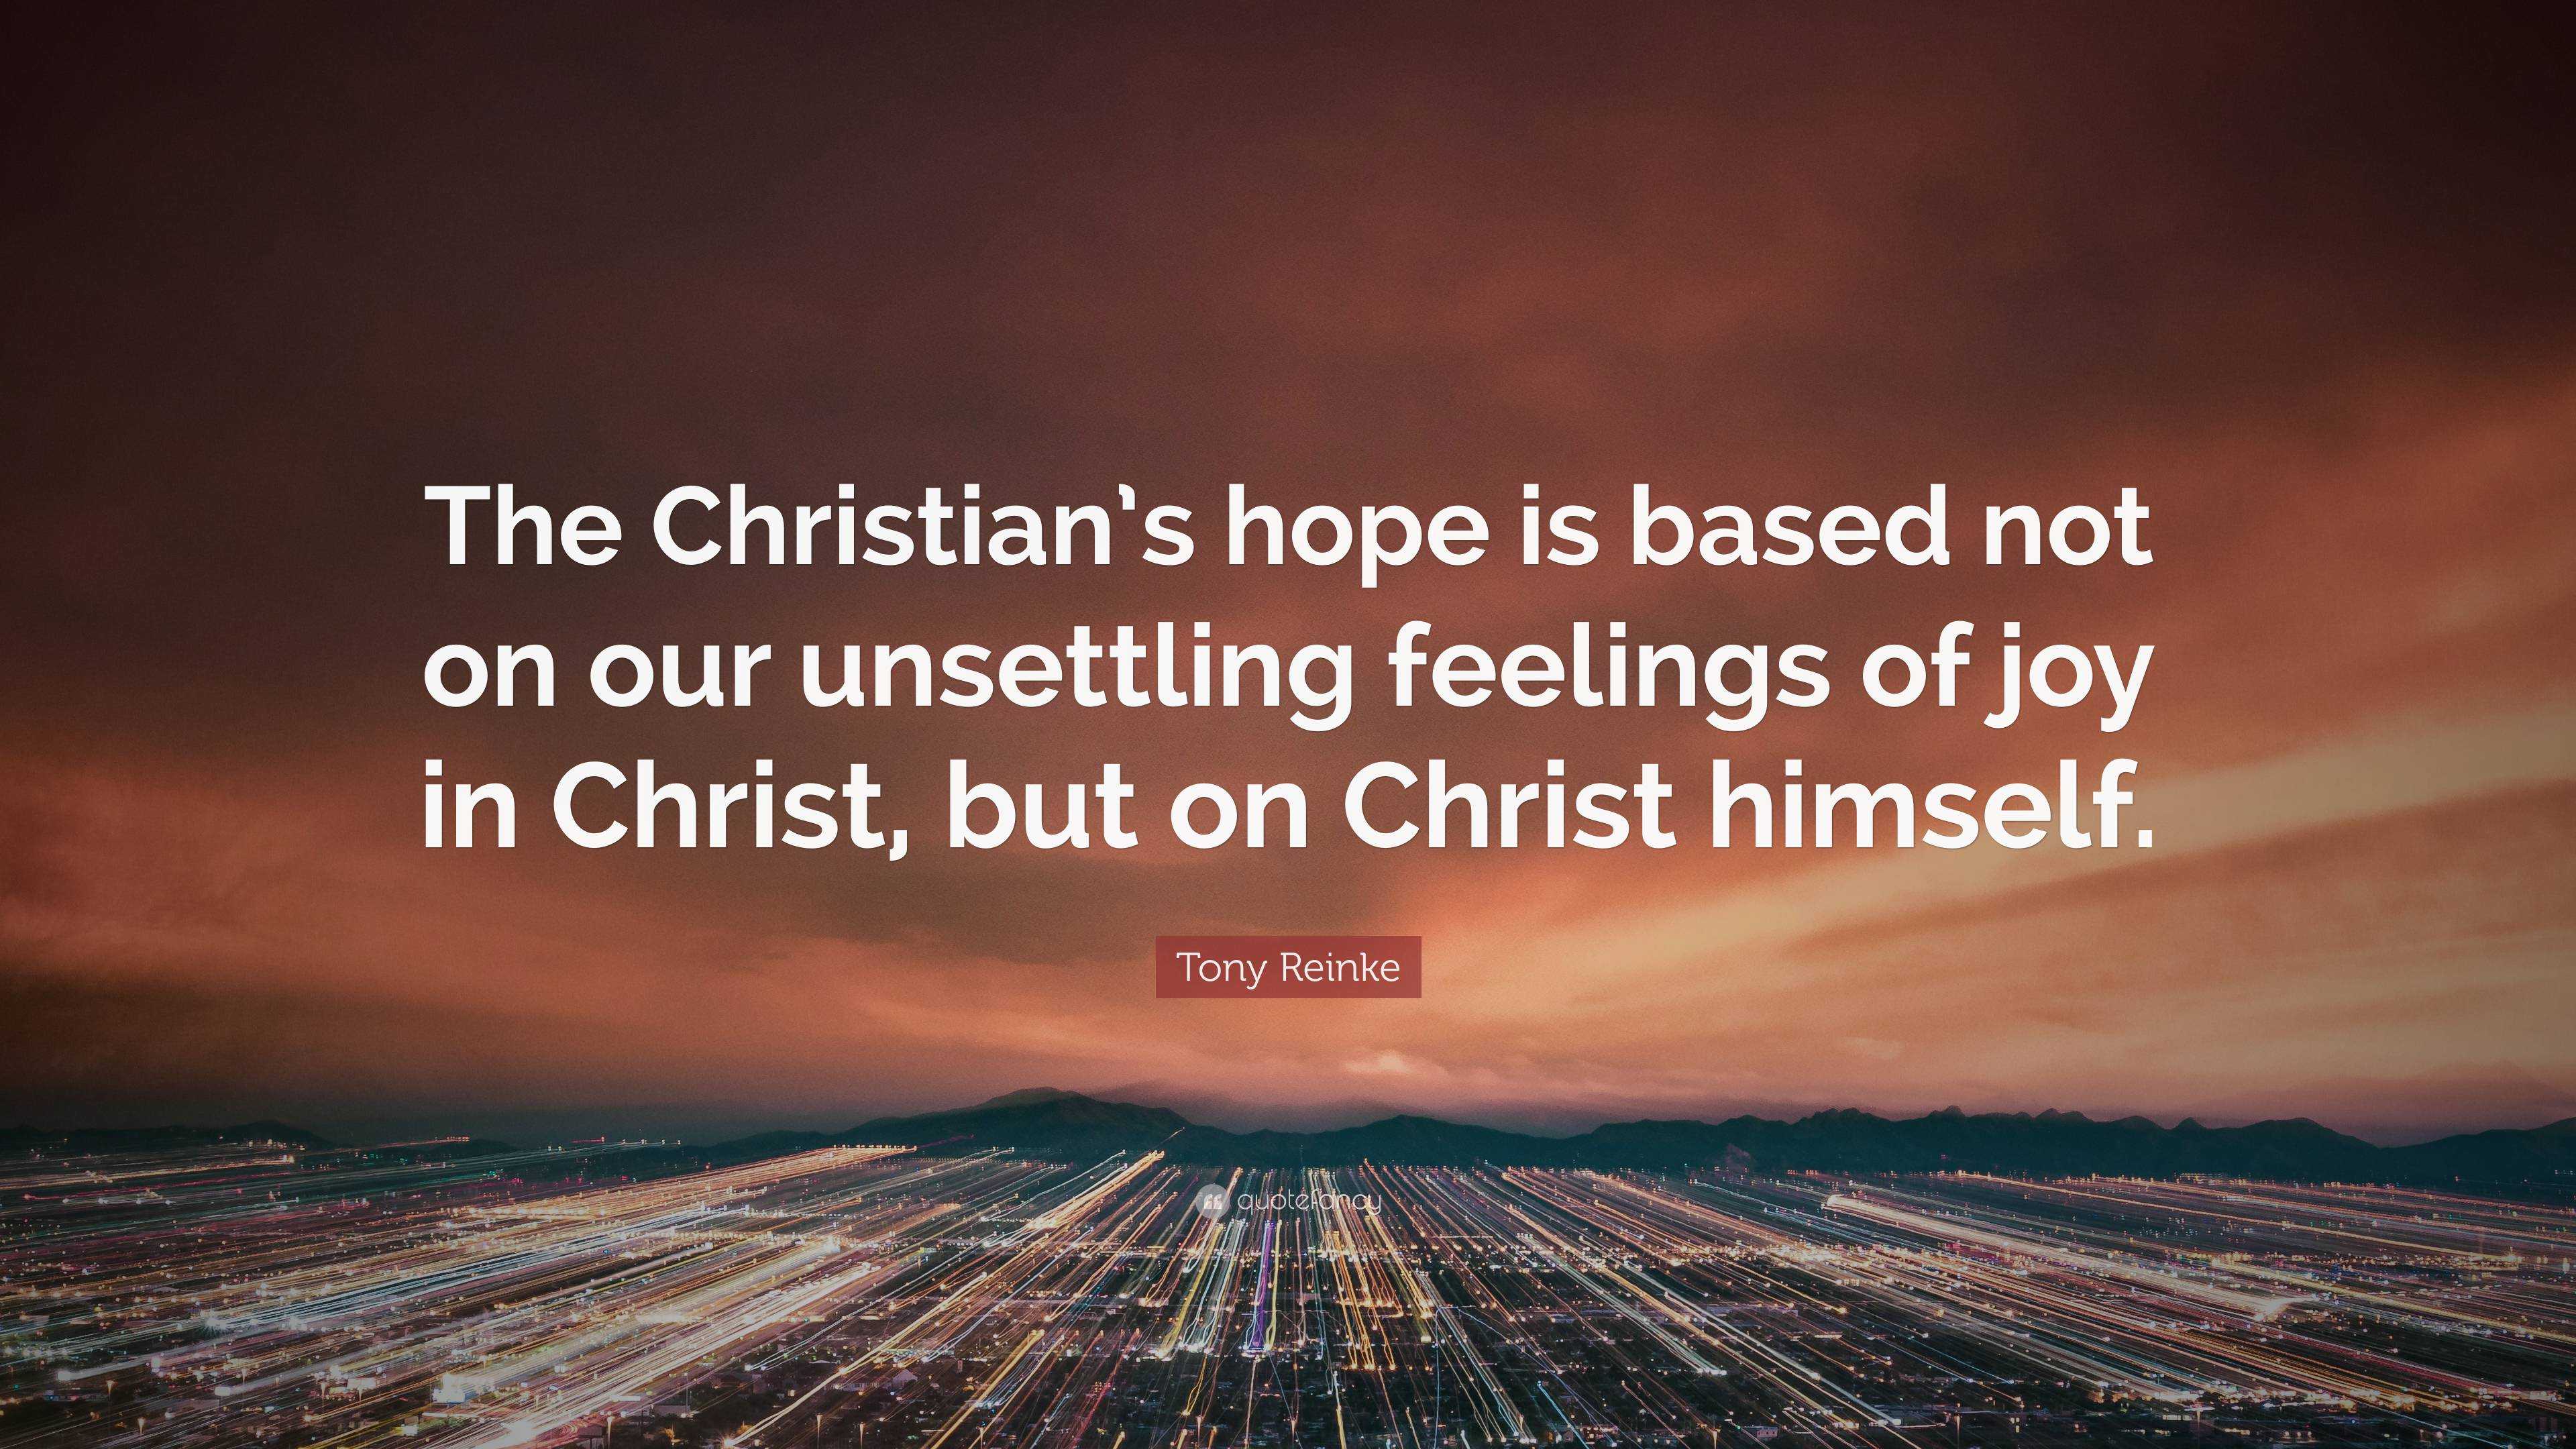 Tony Reinke Quote: “The Christian’s hope is based not on our unsettling ...